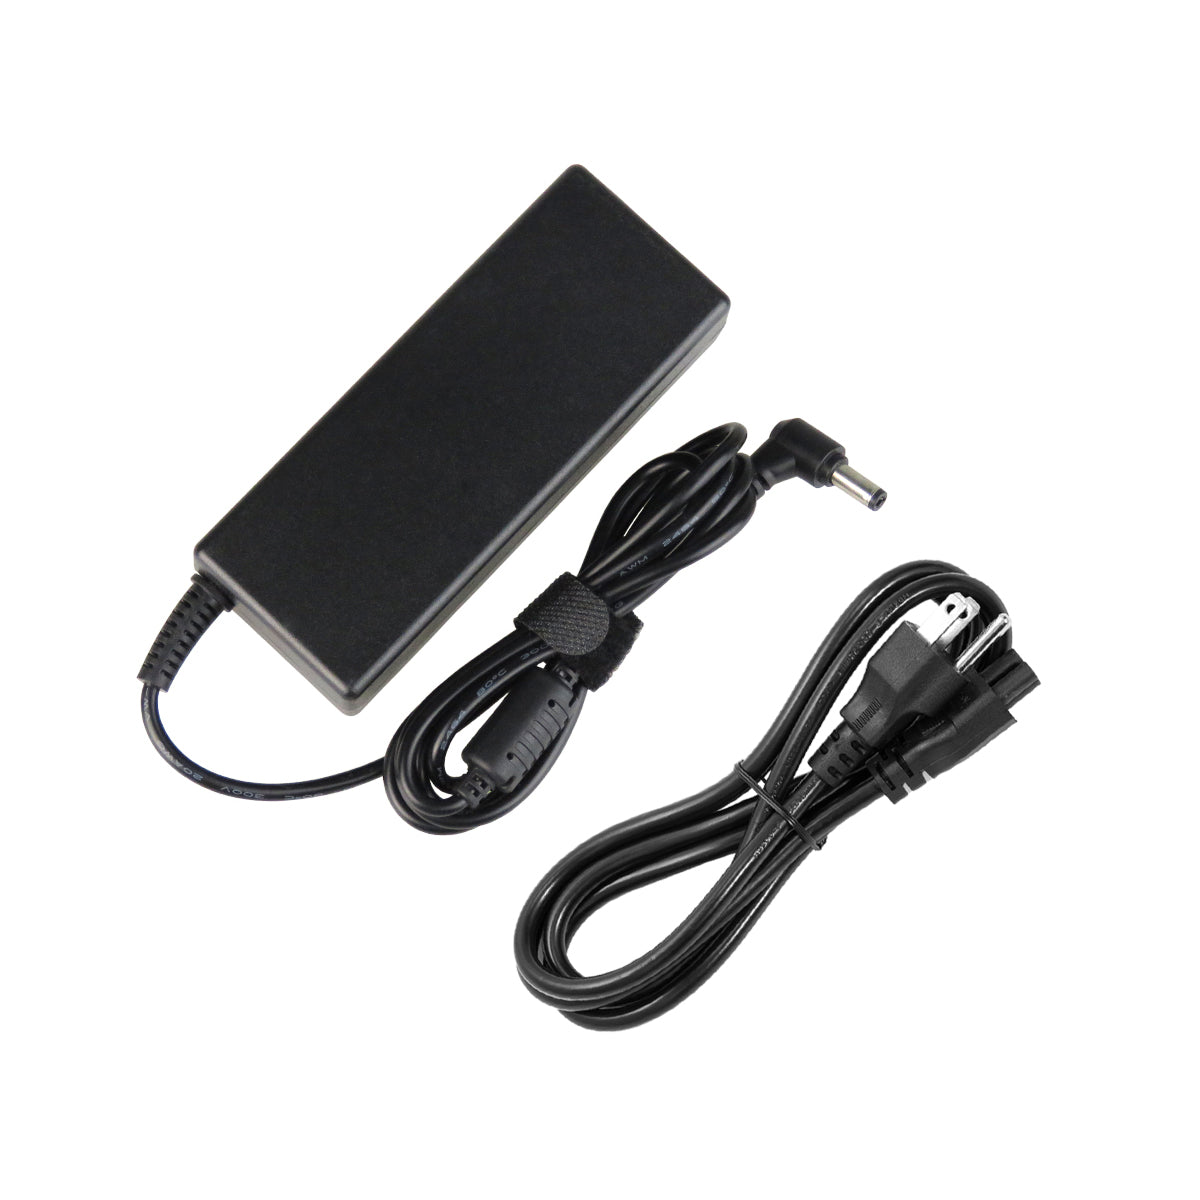 AC Adapter Charger for ASUS ul80j Series Notebook.